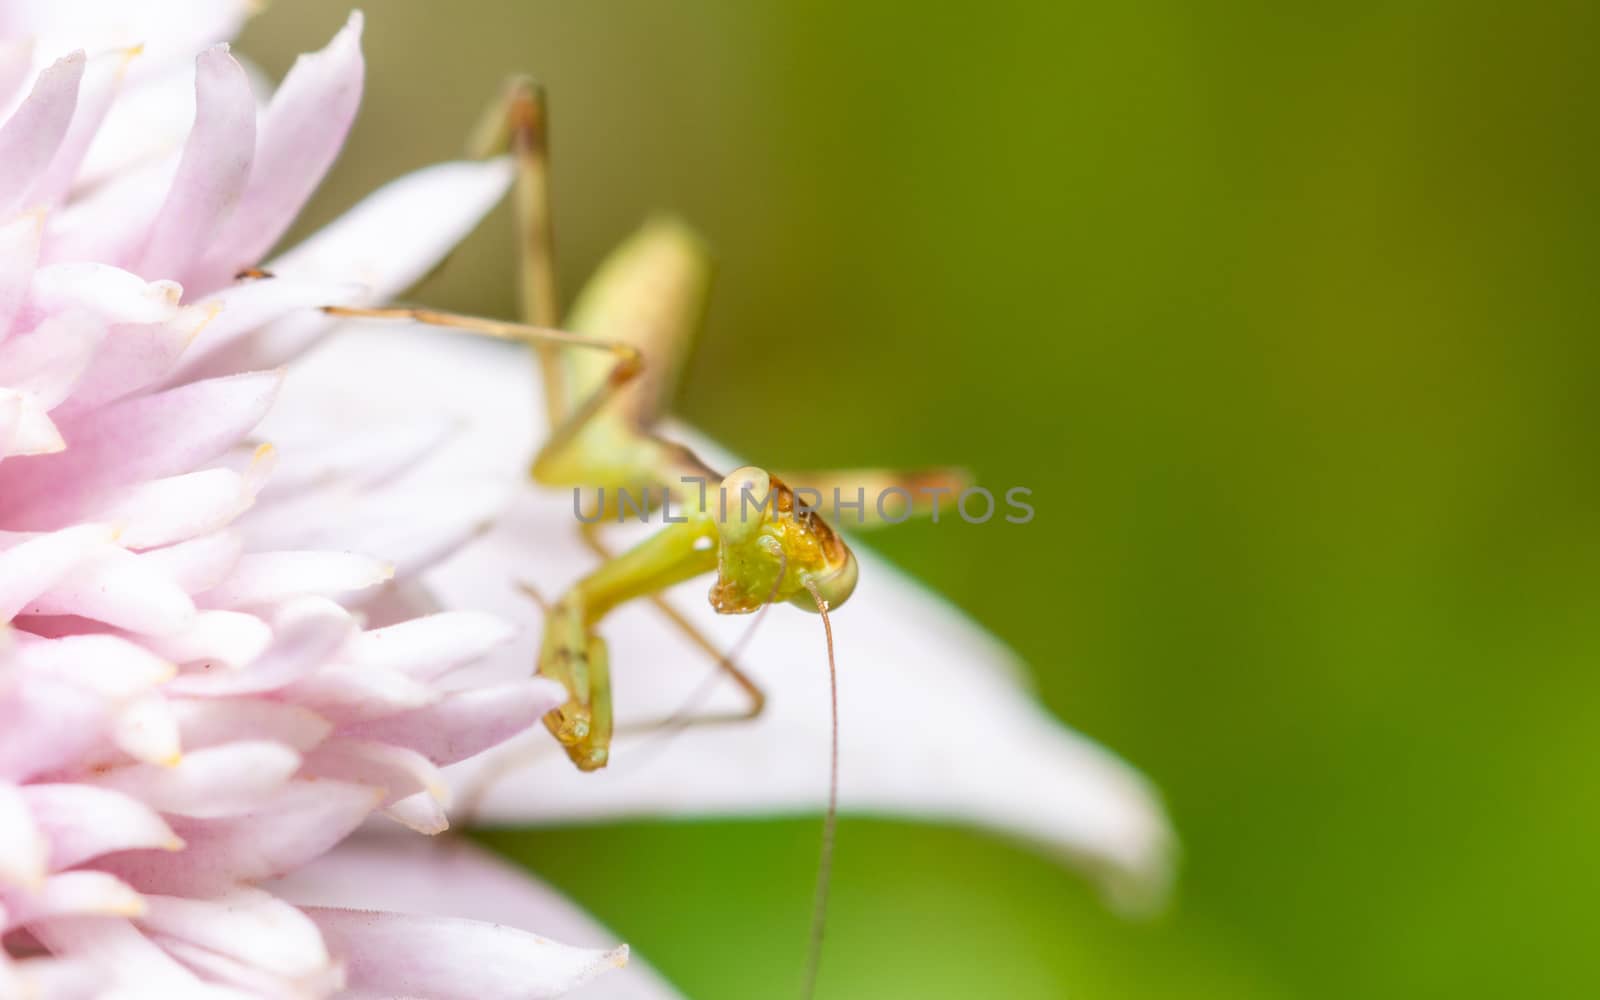 Macro shot of a young praying mantis on a pink flower